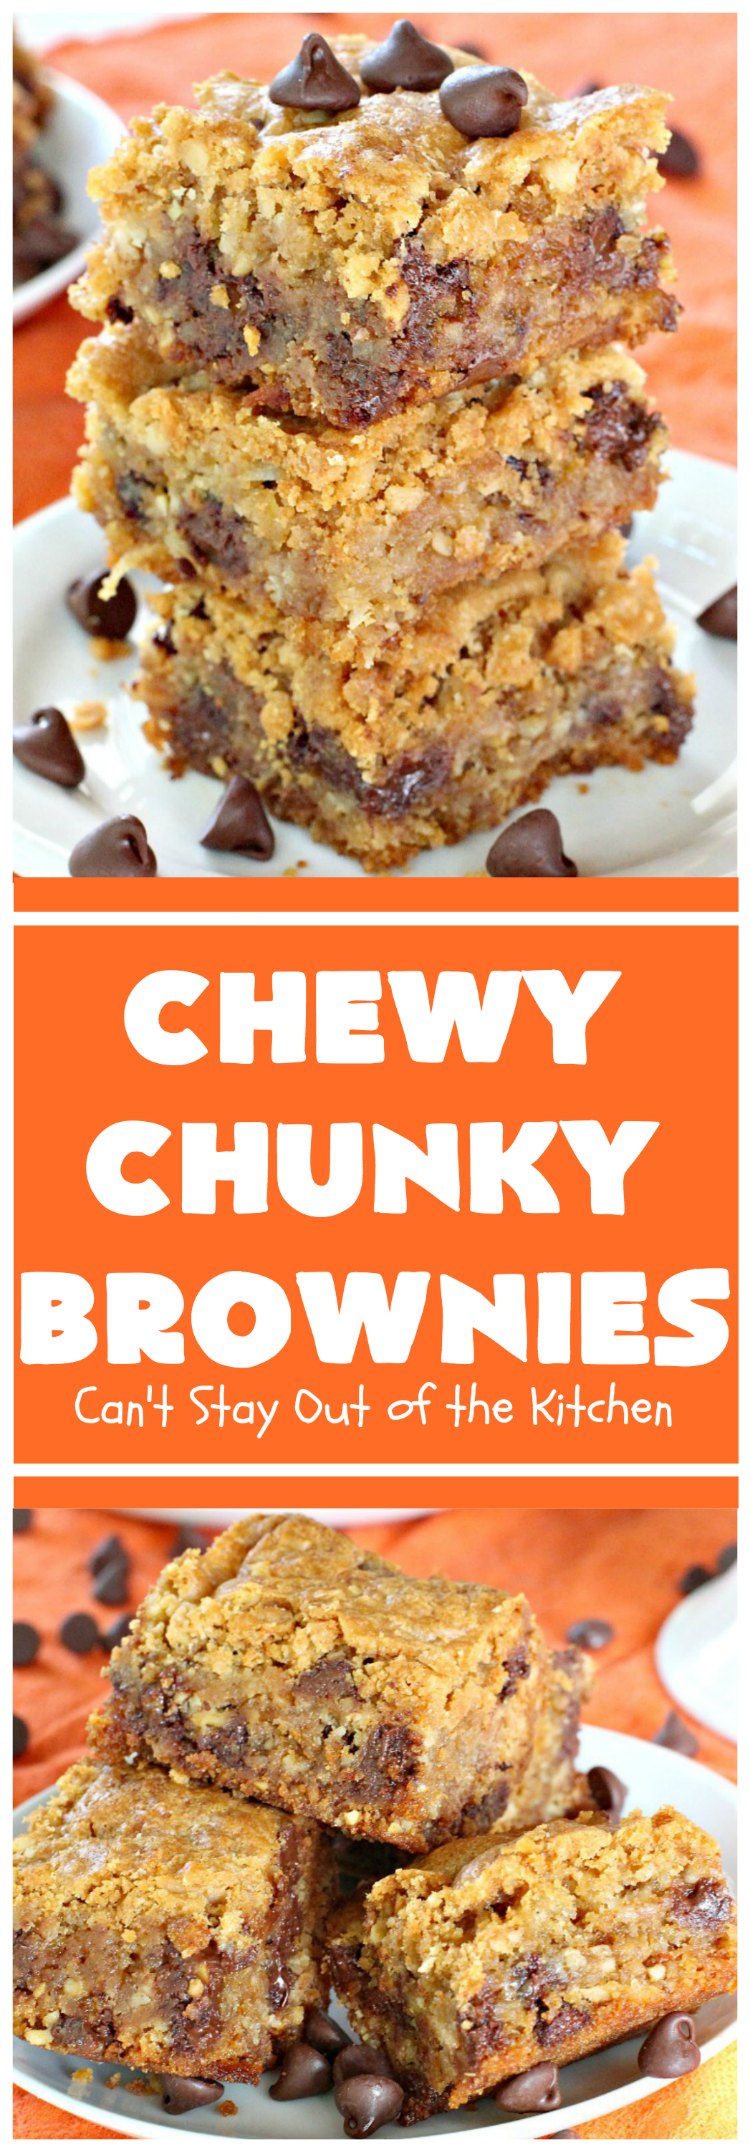 Chewy Chunky Brownies | Can't Stay Out of the Kitchen